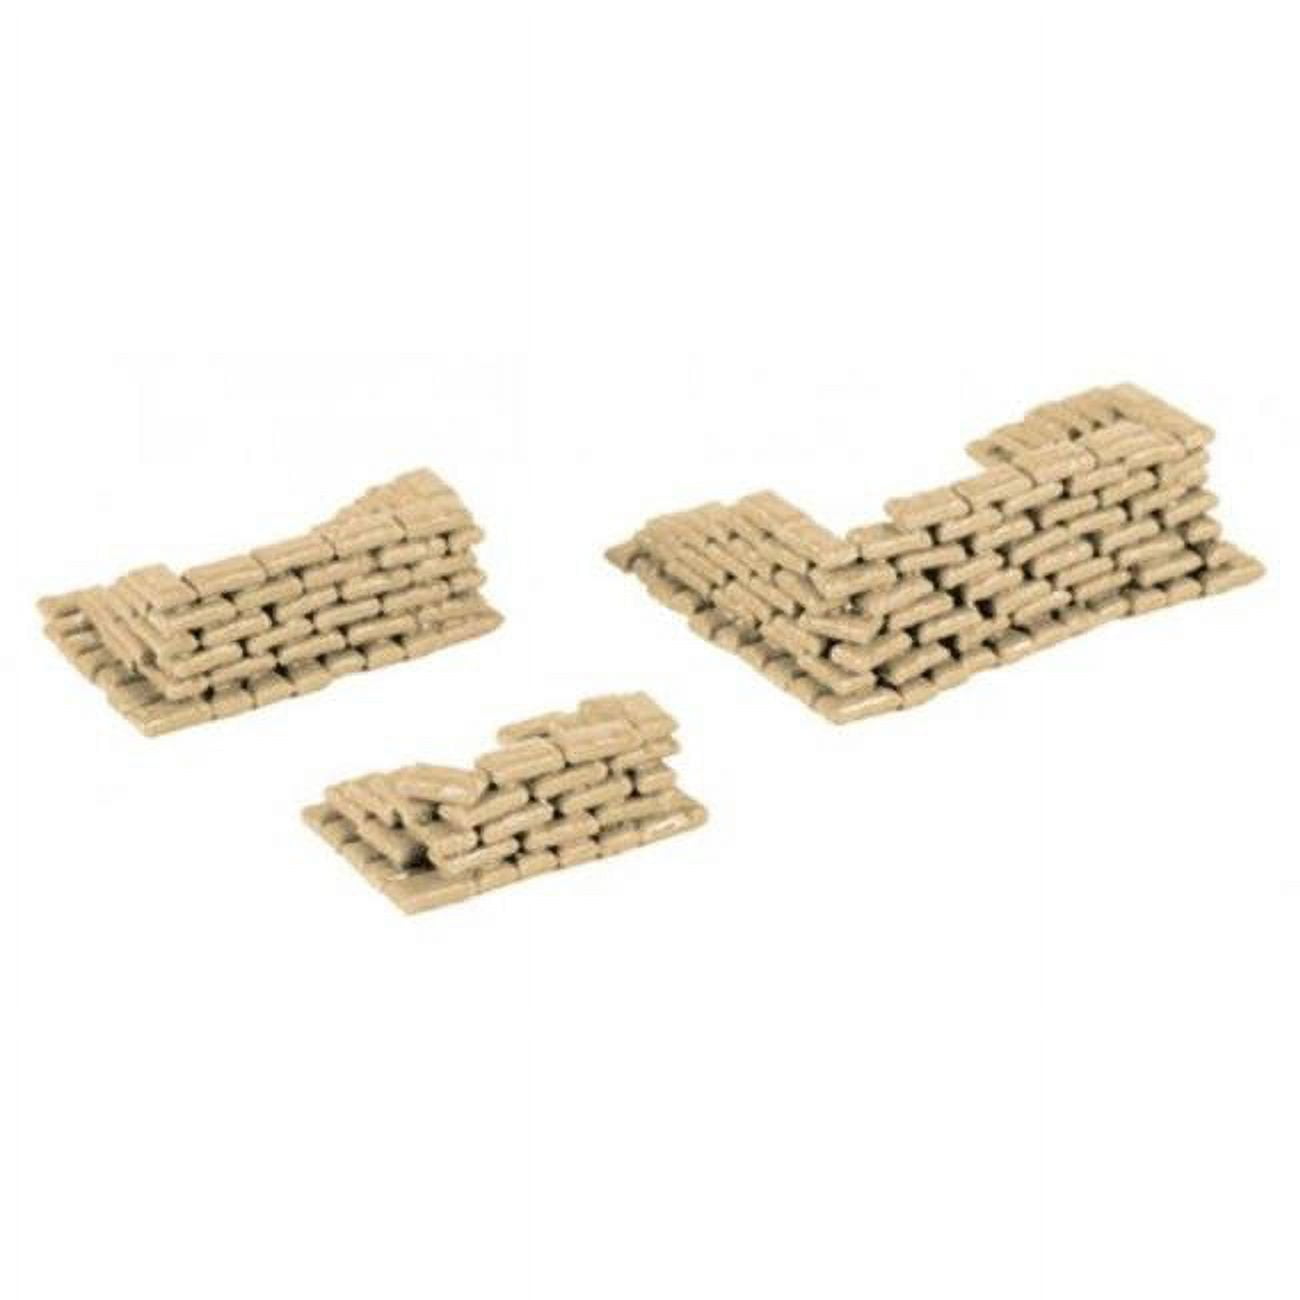 Picture of Herpa 1-87 Military HE745833 1-87 Military Accessories Sandbags - 200 Piece